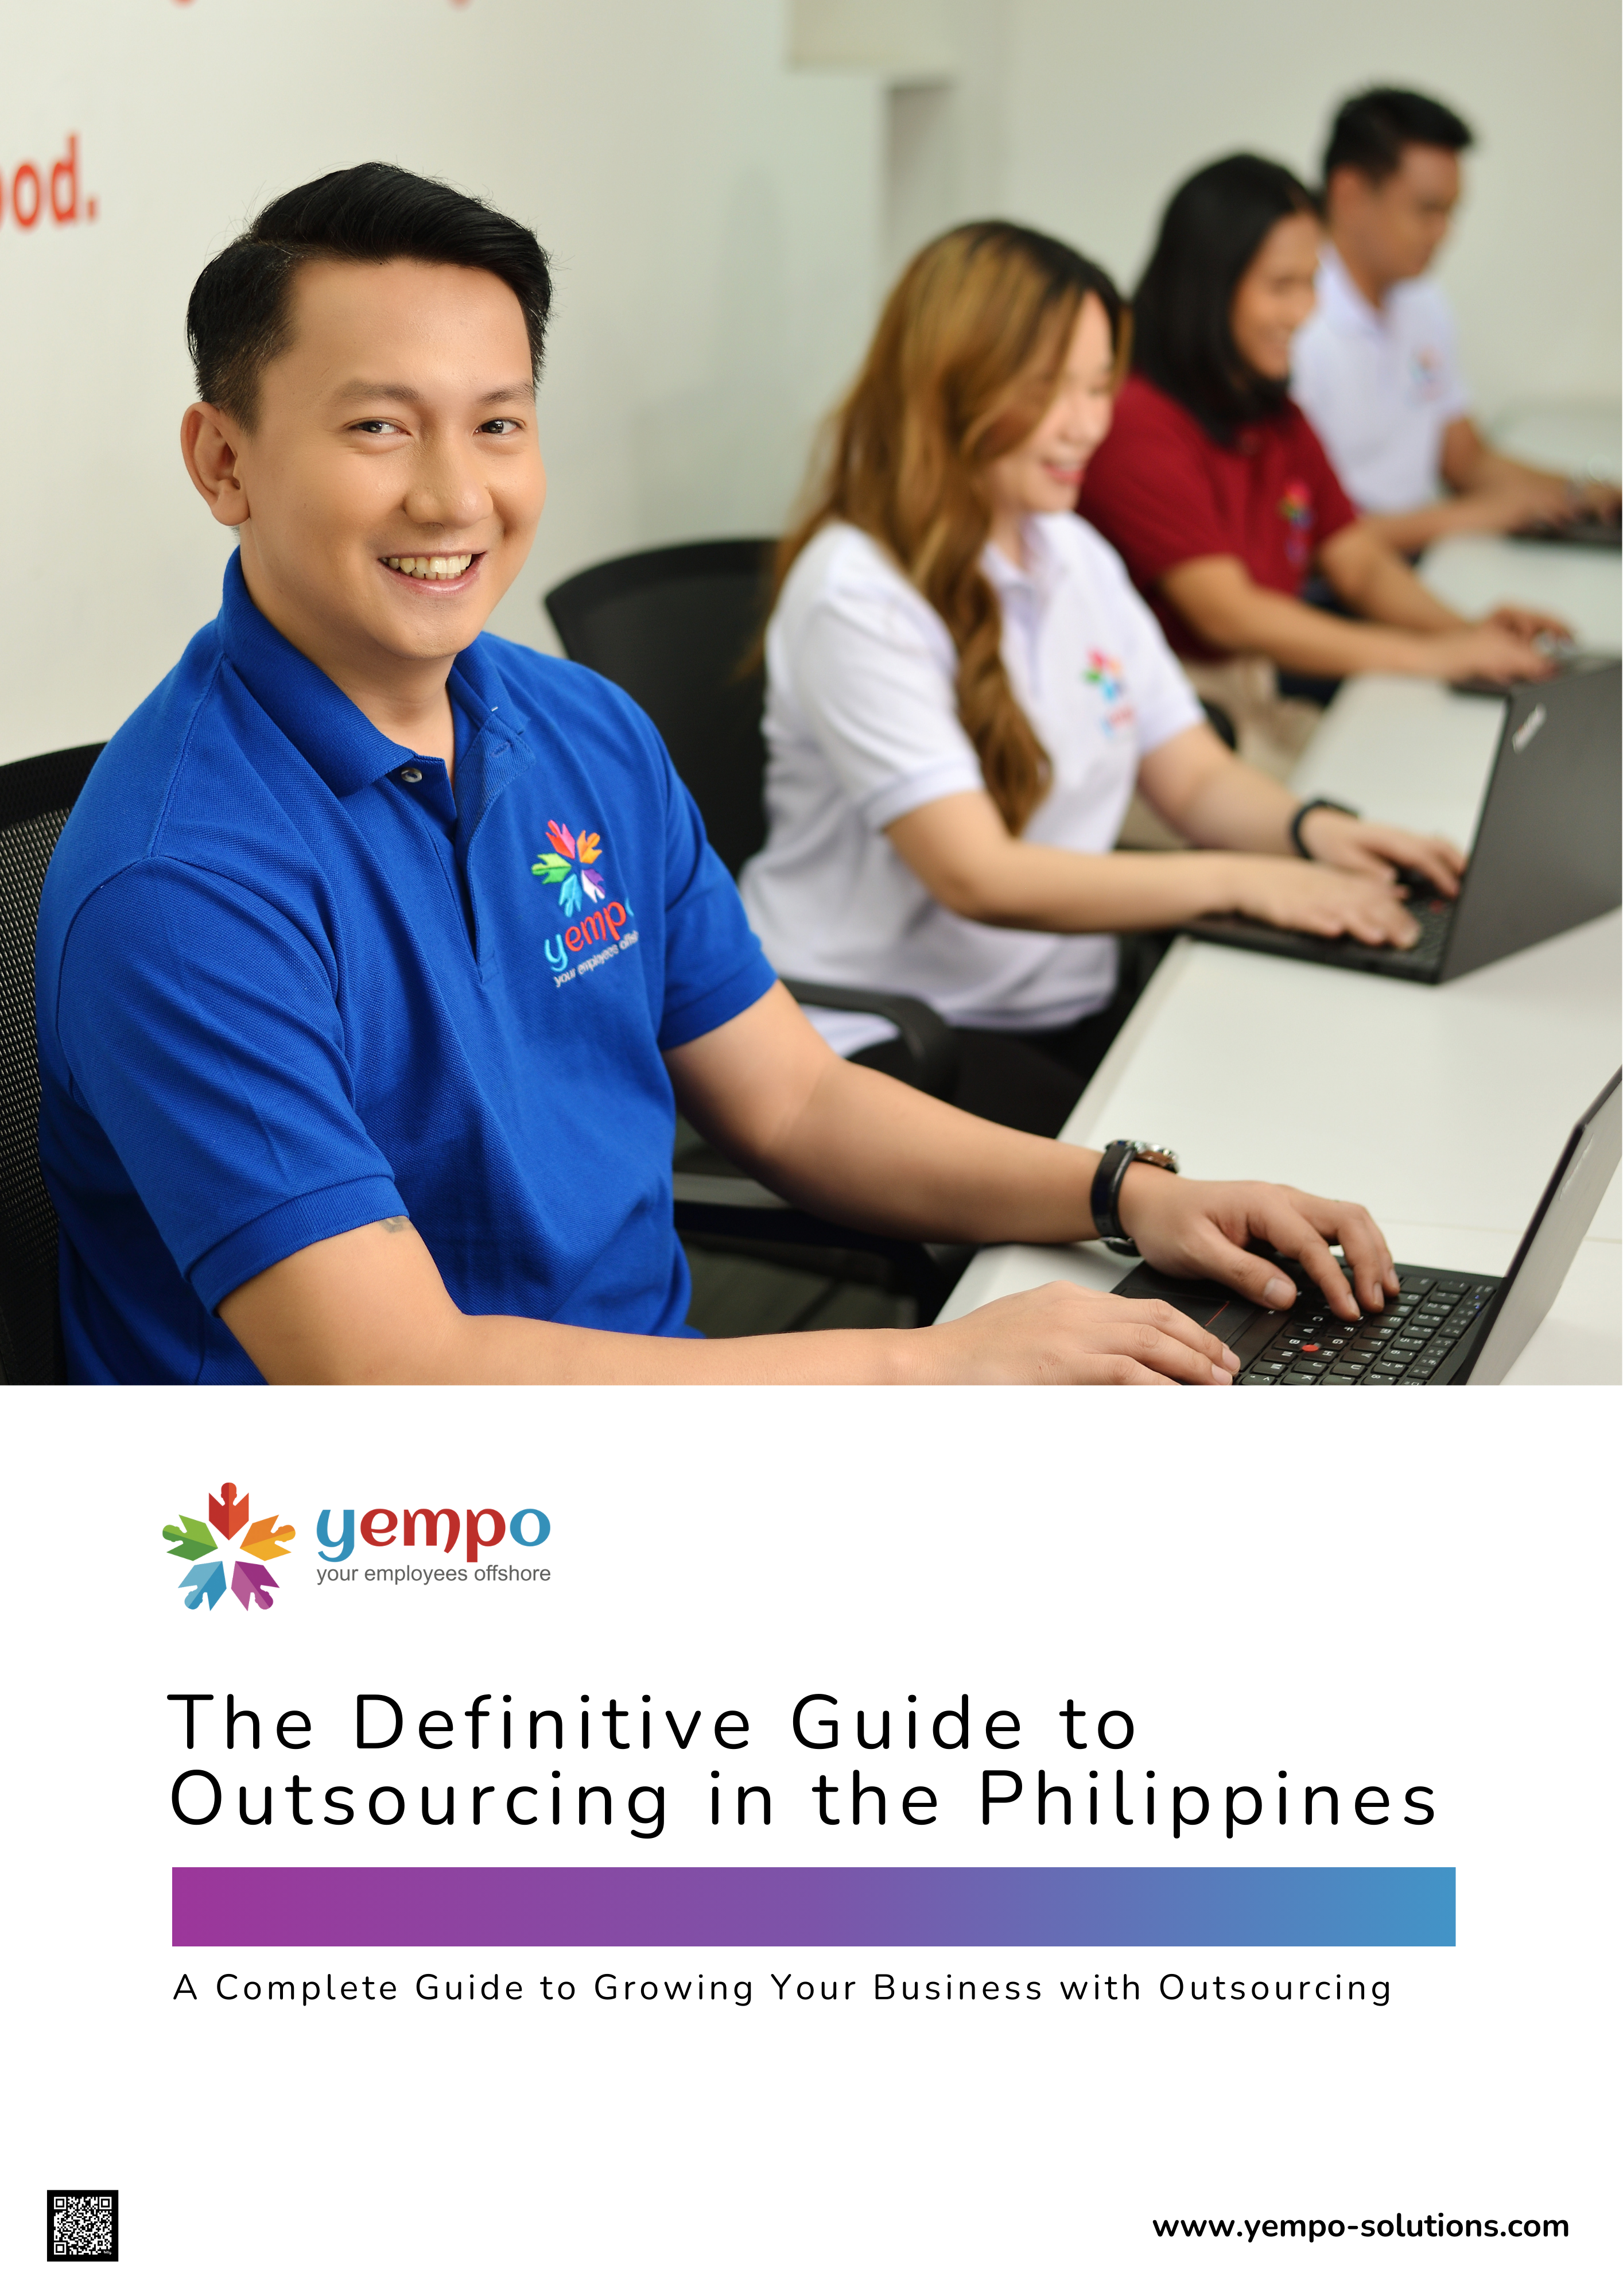 The Definitive Guide to Outsourcing in the Philippines